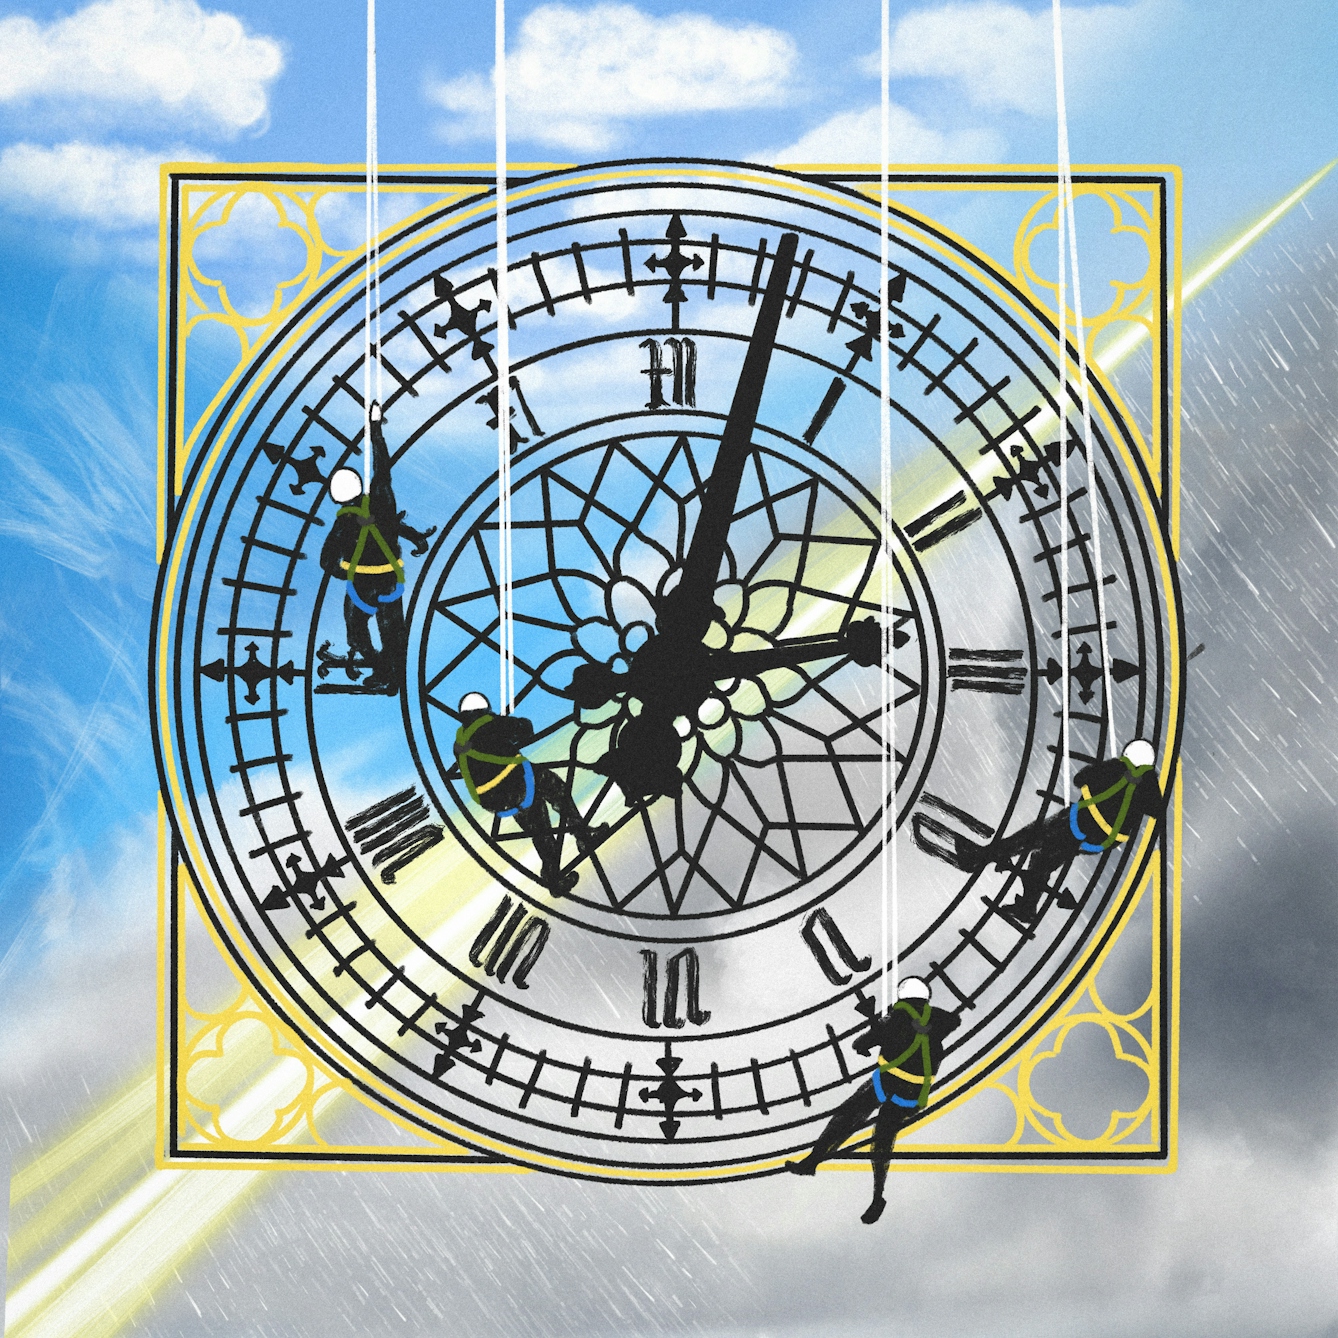 A digital illustration of a traditional looking clock face with Roman markers and workers abseiling down the face. In the background there is a mix of weather patterns merging into one, from bright blue skies to dark stormy rainclouds and lightening bolts.